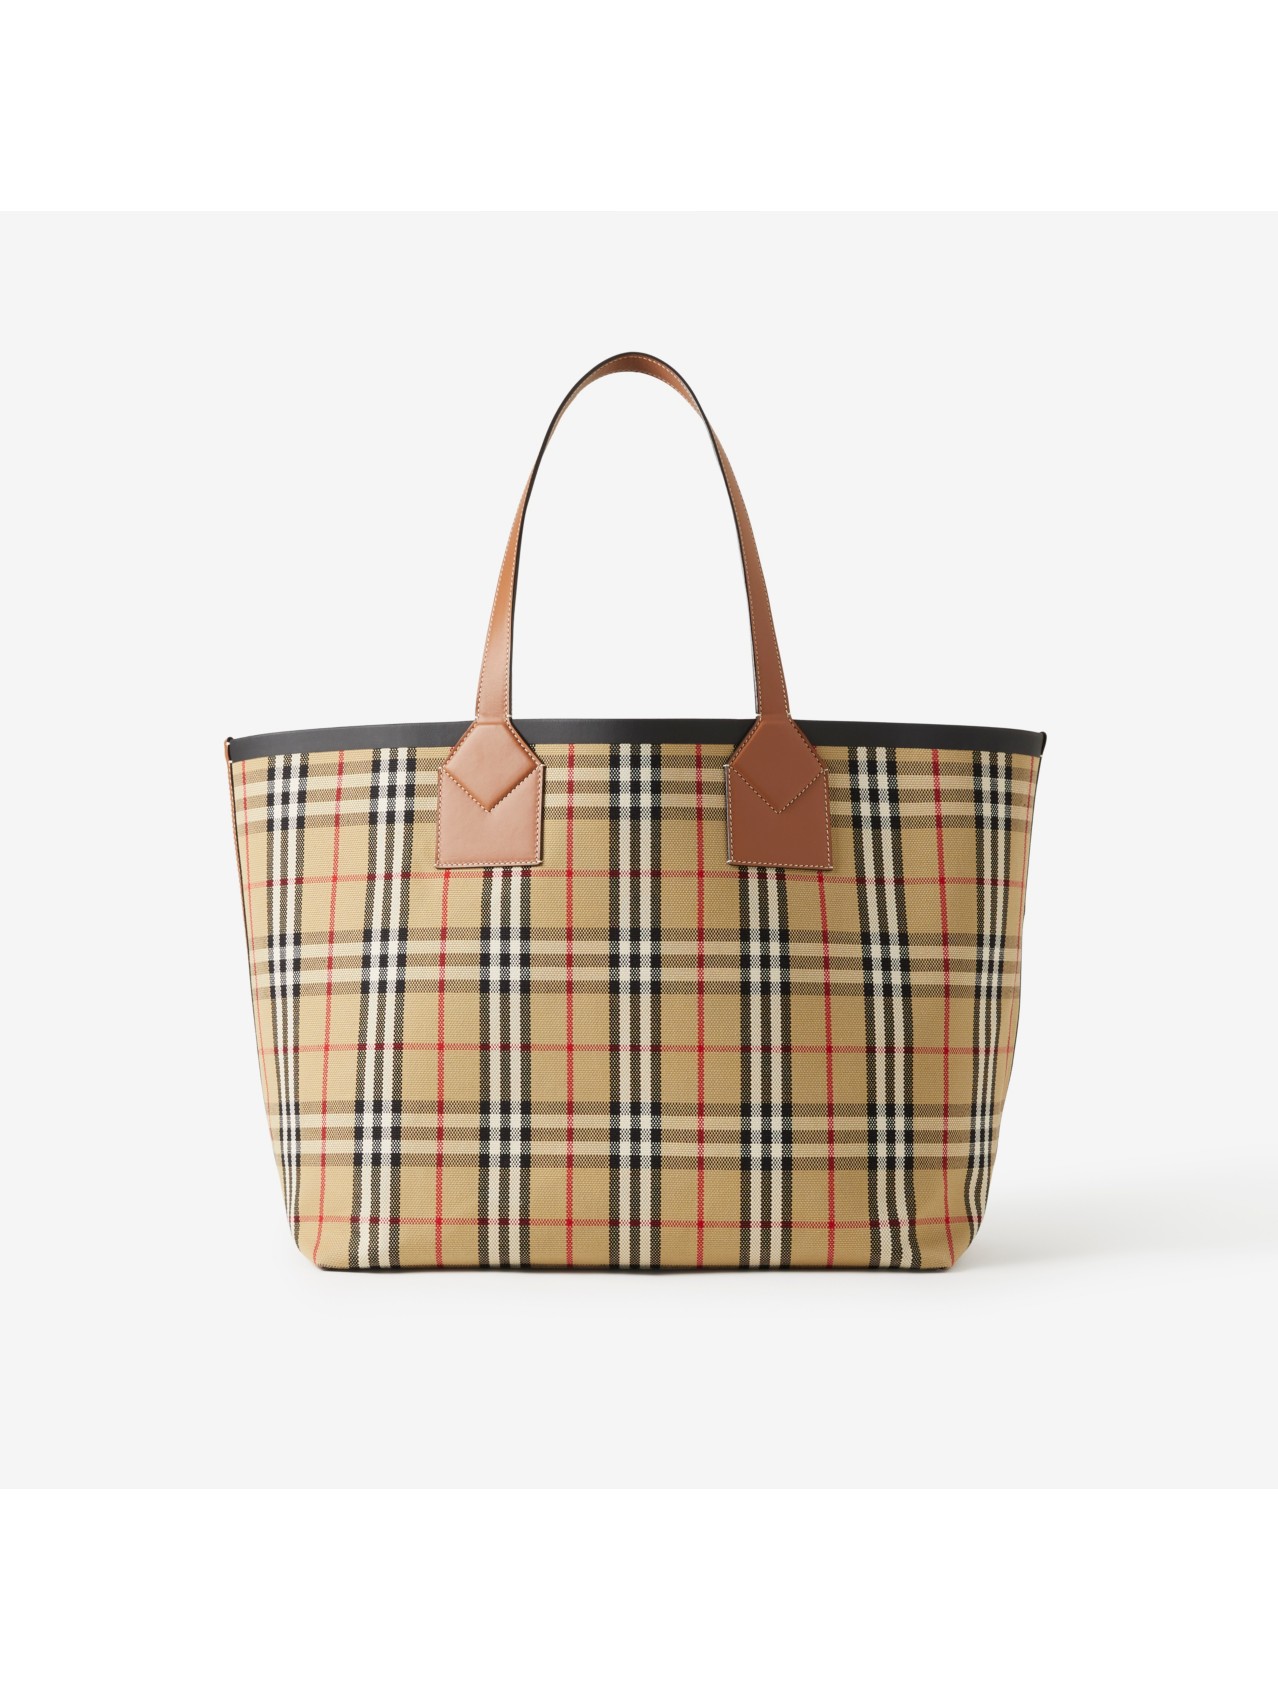 Designer Tote Bags | Canvas & Leather Tote Bags | Burberry® Official